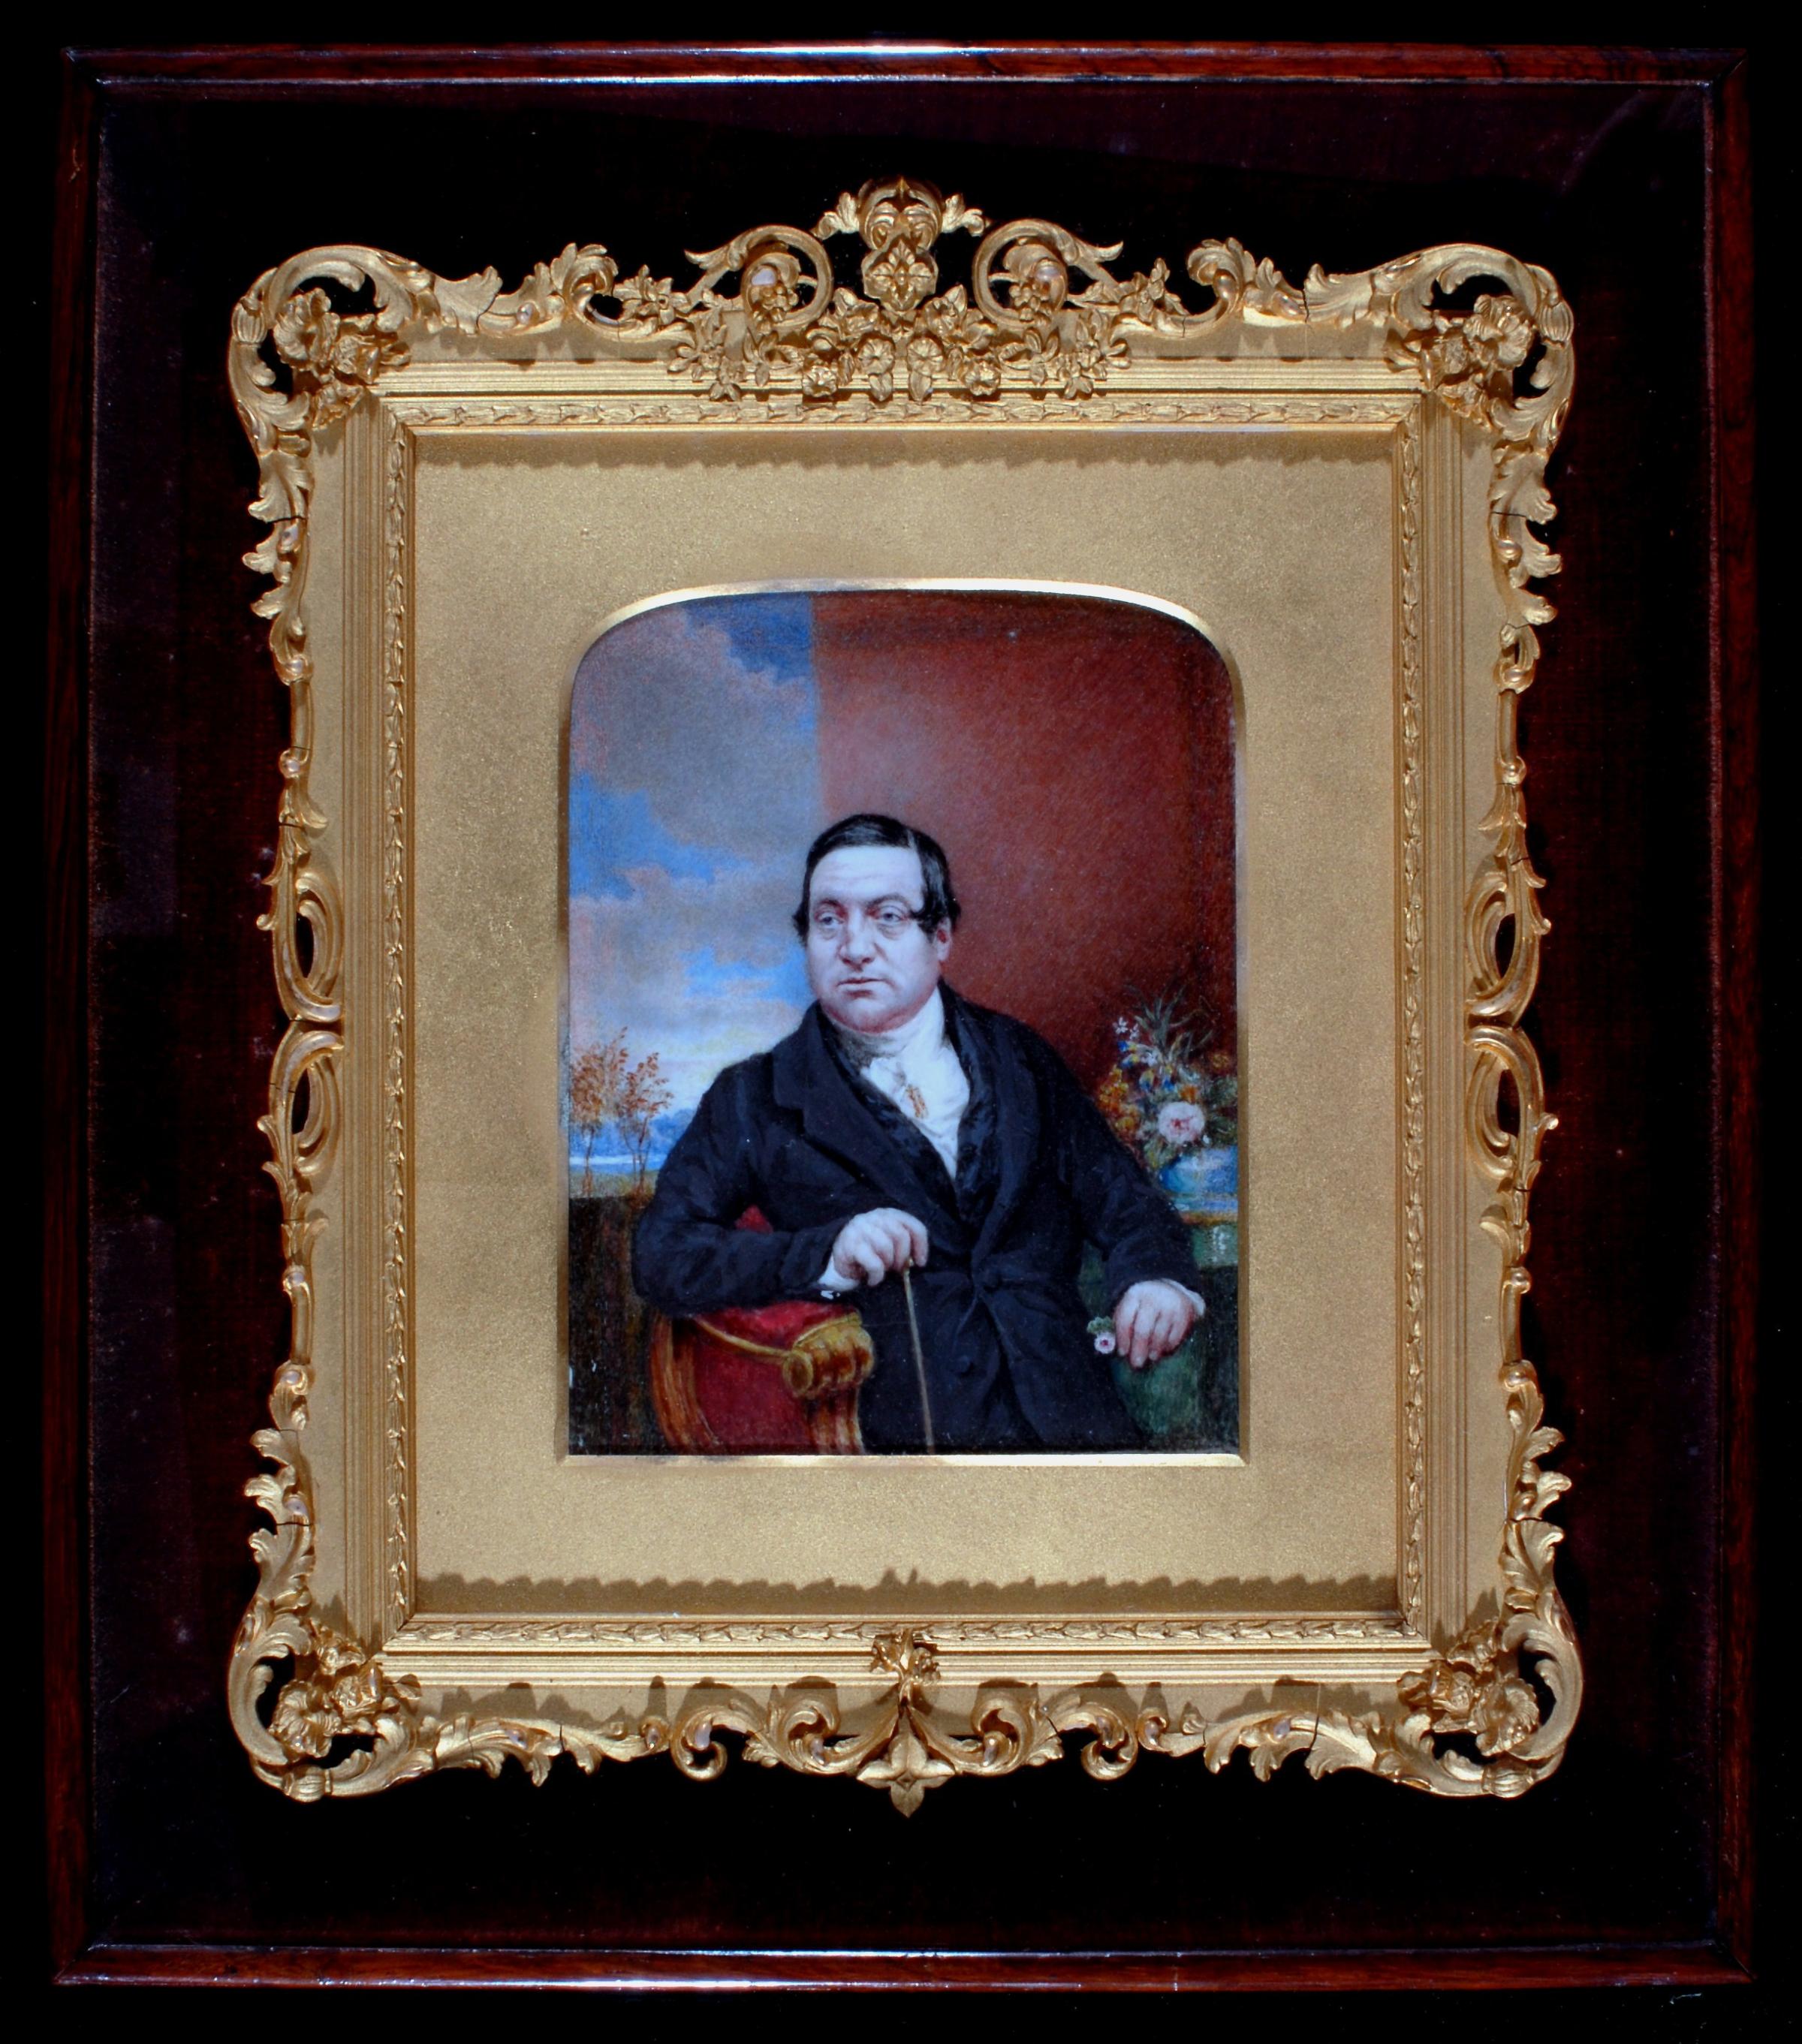 A miniature watercolour painting of trainer John Scott, which was bought by the Bowes Museum in 2007